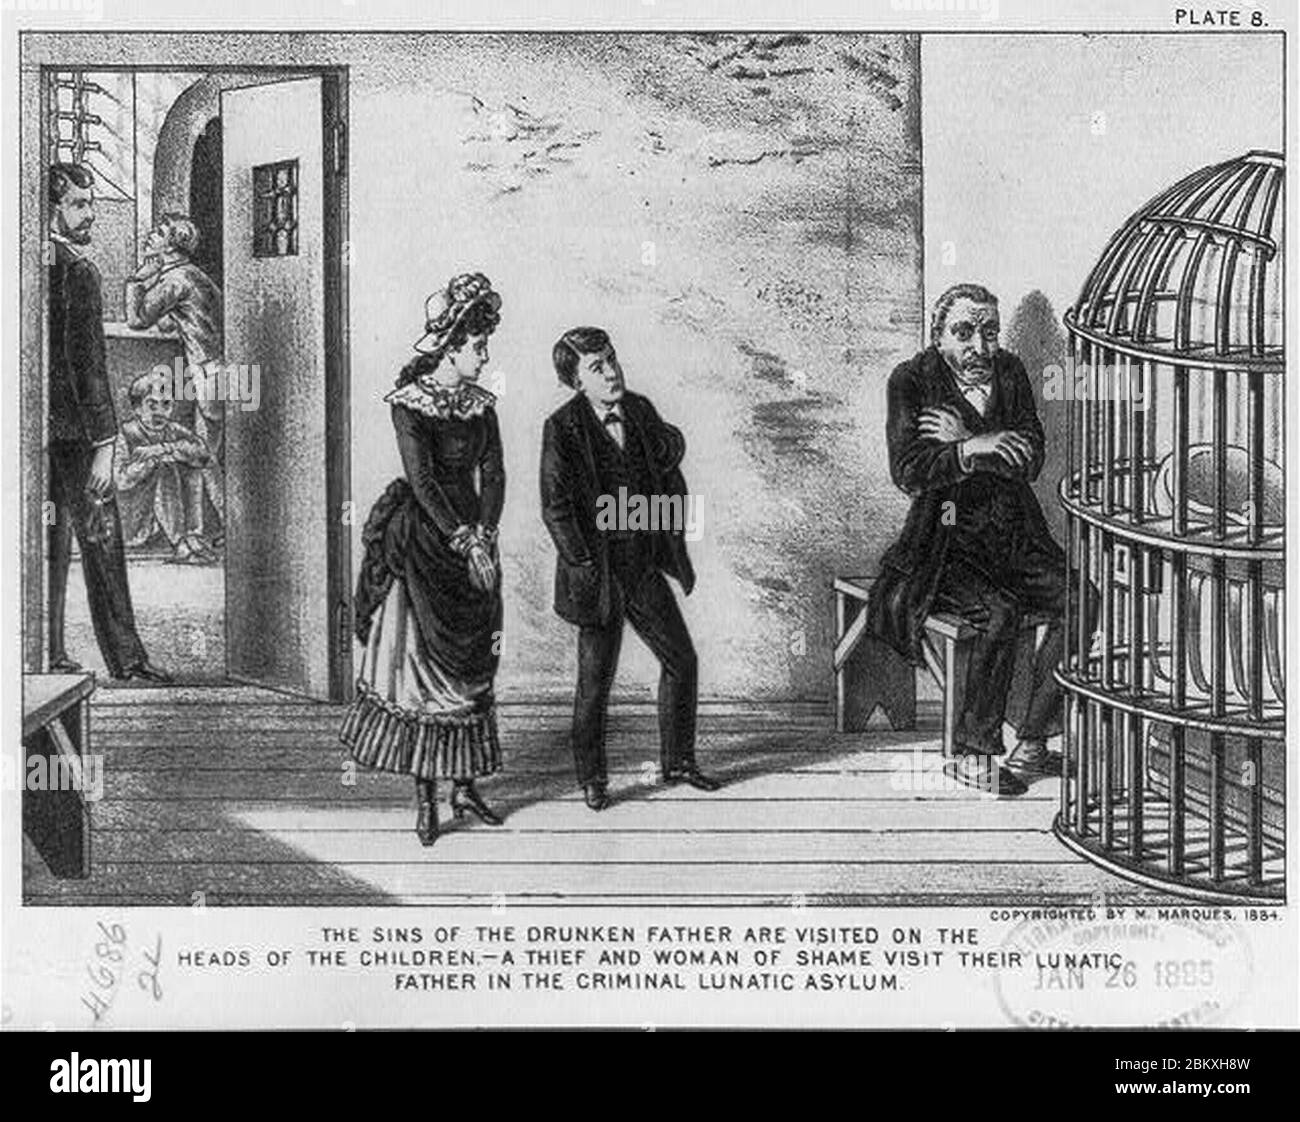 Illustration of the dangers of alcoholic beverages)- The sins of the drunken father are visited on the heads of the children - a thief and woman of shame visit their lunatic father in the Stock Photo